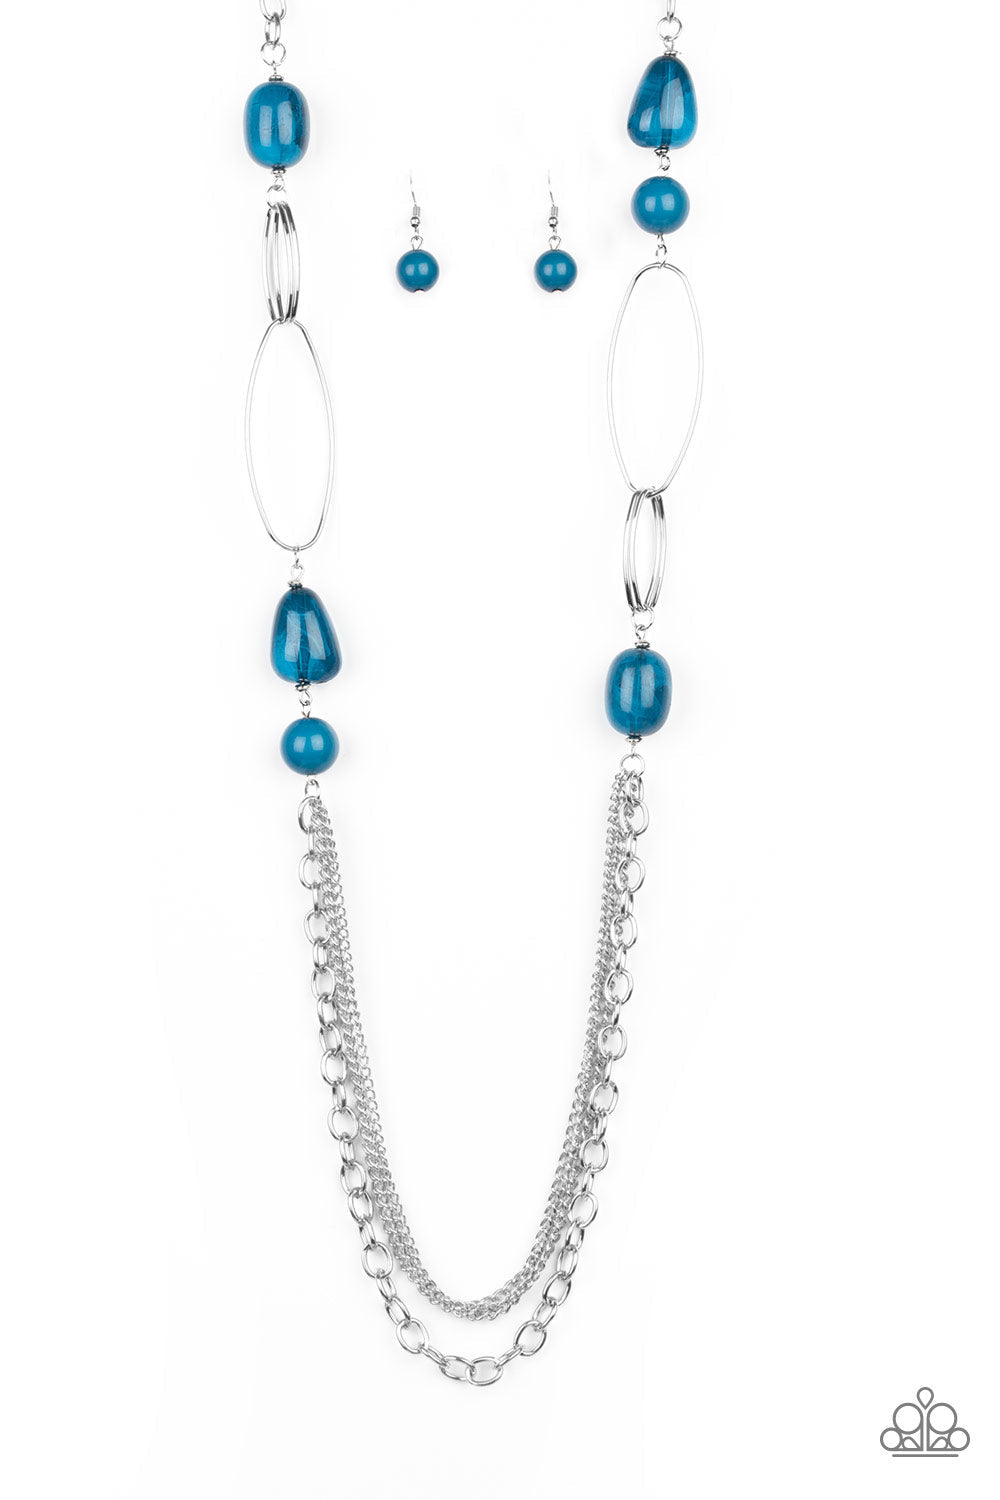 Pleasant Promenade - Blue and Silver Necklace - Paparazzi Accessories - Polished and cloudy faux rock finishes, blue beads link with bold silver hoops. The whimsical compilation gives way to layers of mismatched silver chains for a seasonal finish. Features an adjustable clasp closure necklace.